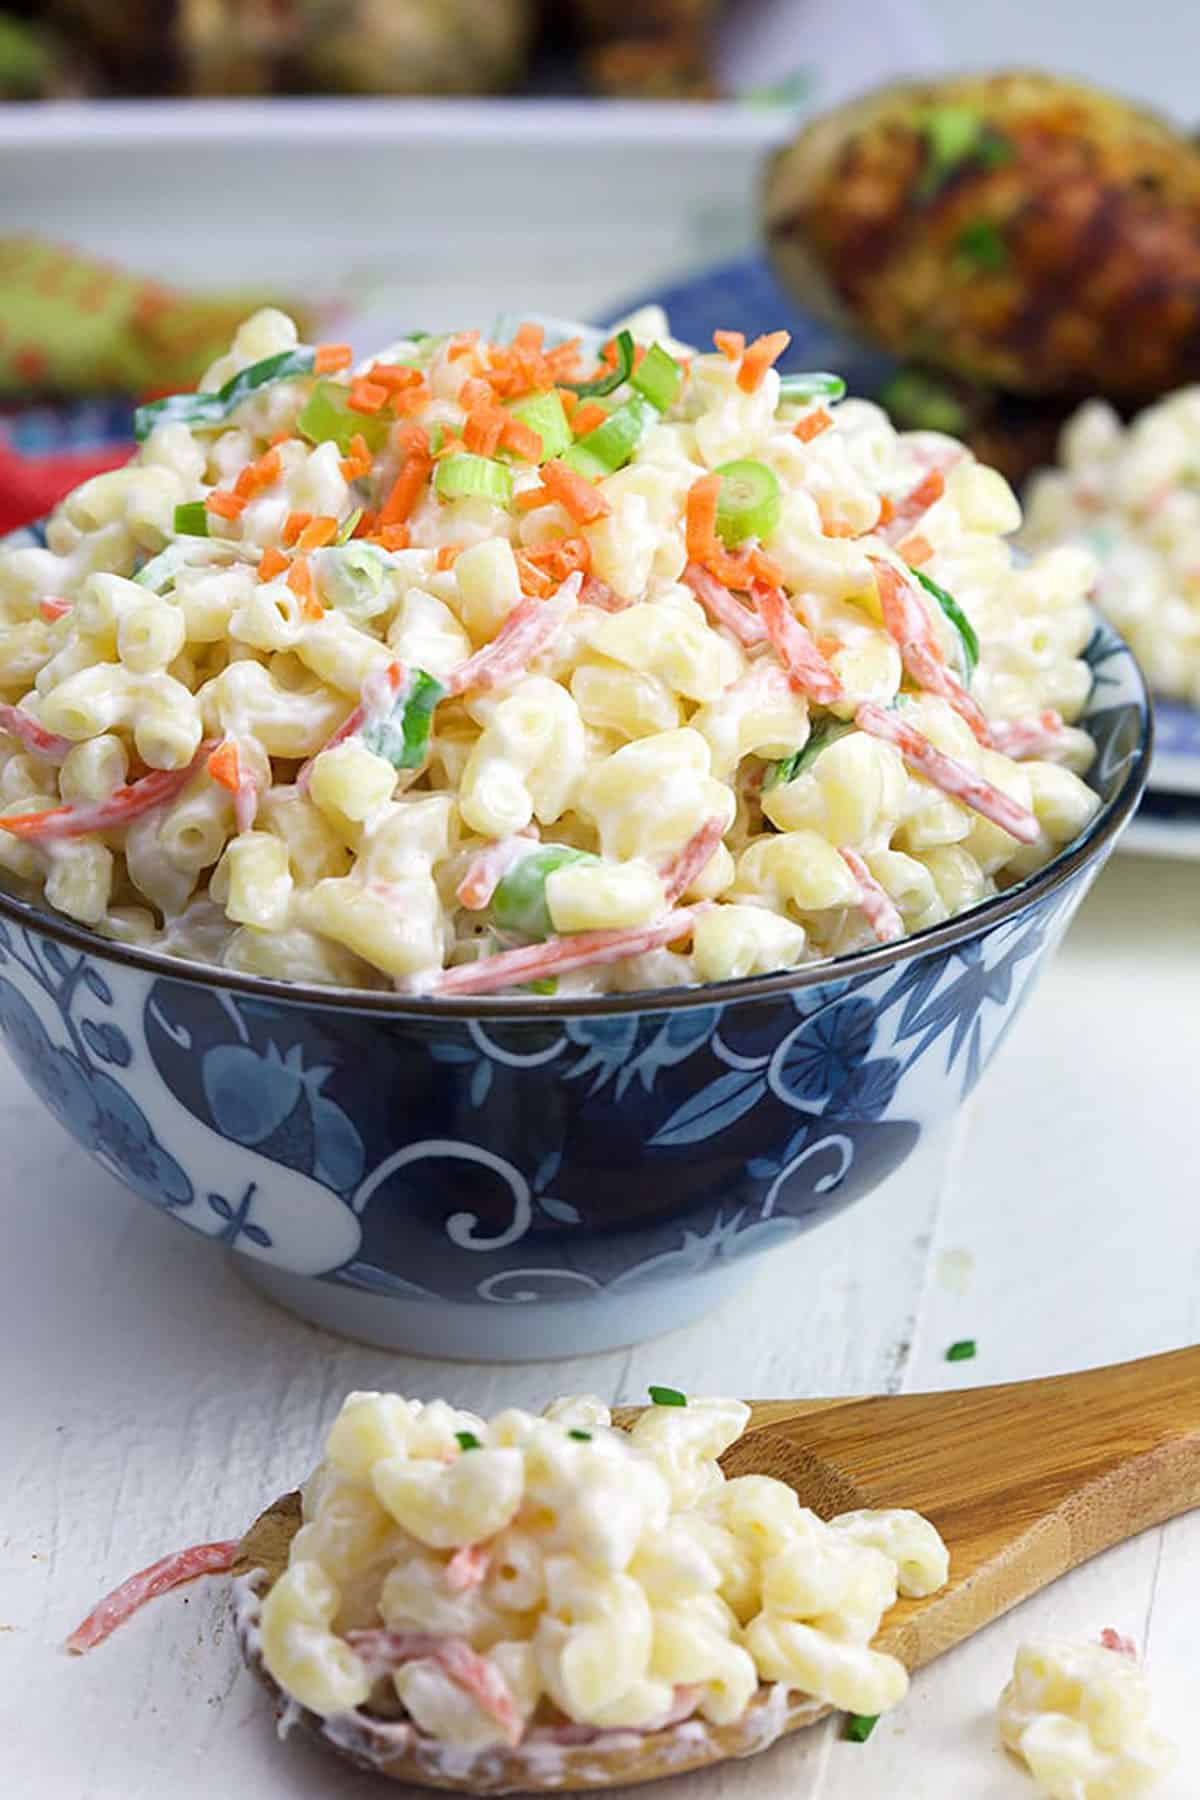 Hawaiian Macaroni Salad in a blue and white bowl with a wooden spoon.